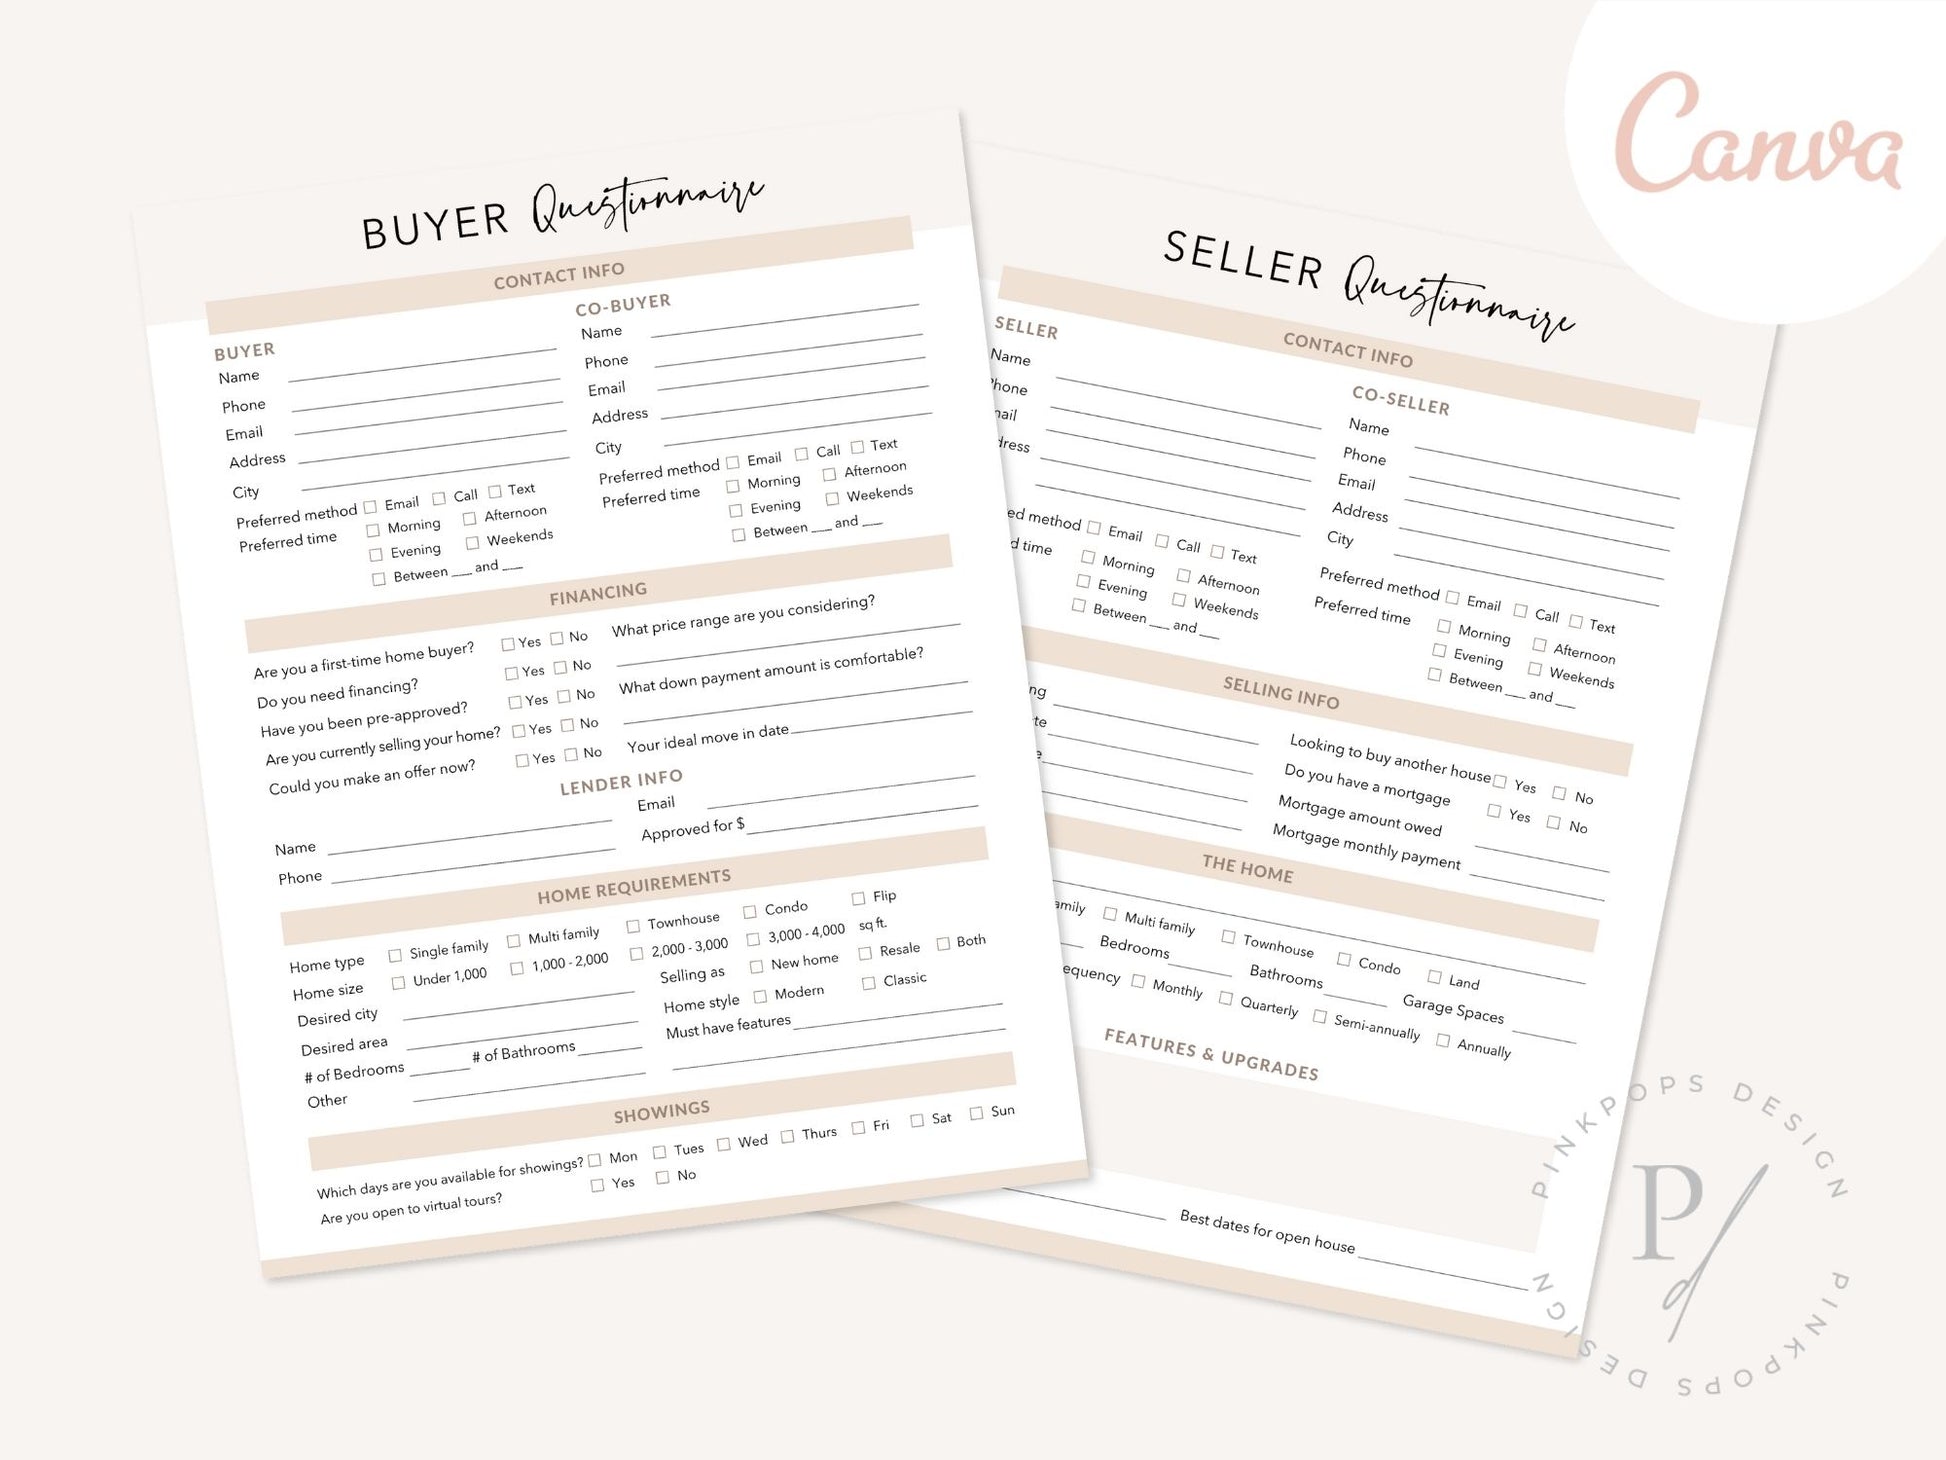 Real Estate Buyer & Seller Questionnaire - Editable template for enhancing client communication and ensuring a well-informed and organized real estate transaction process.